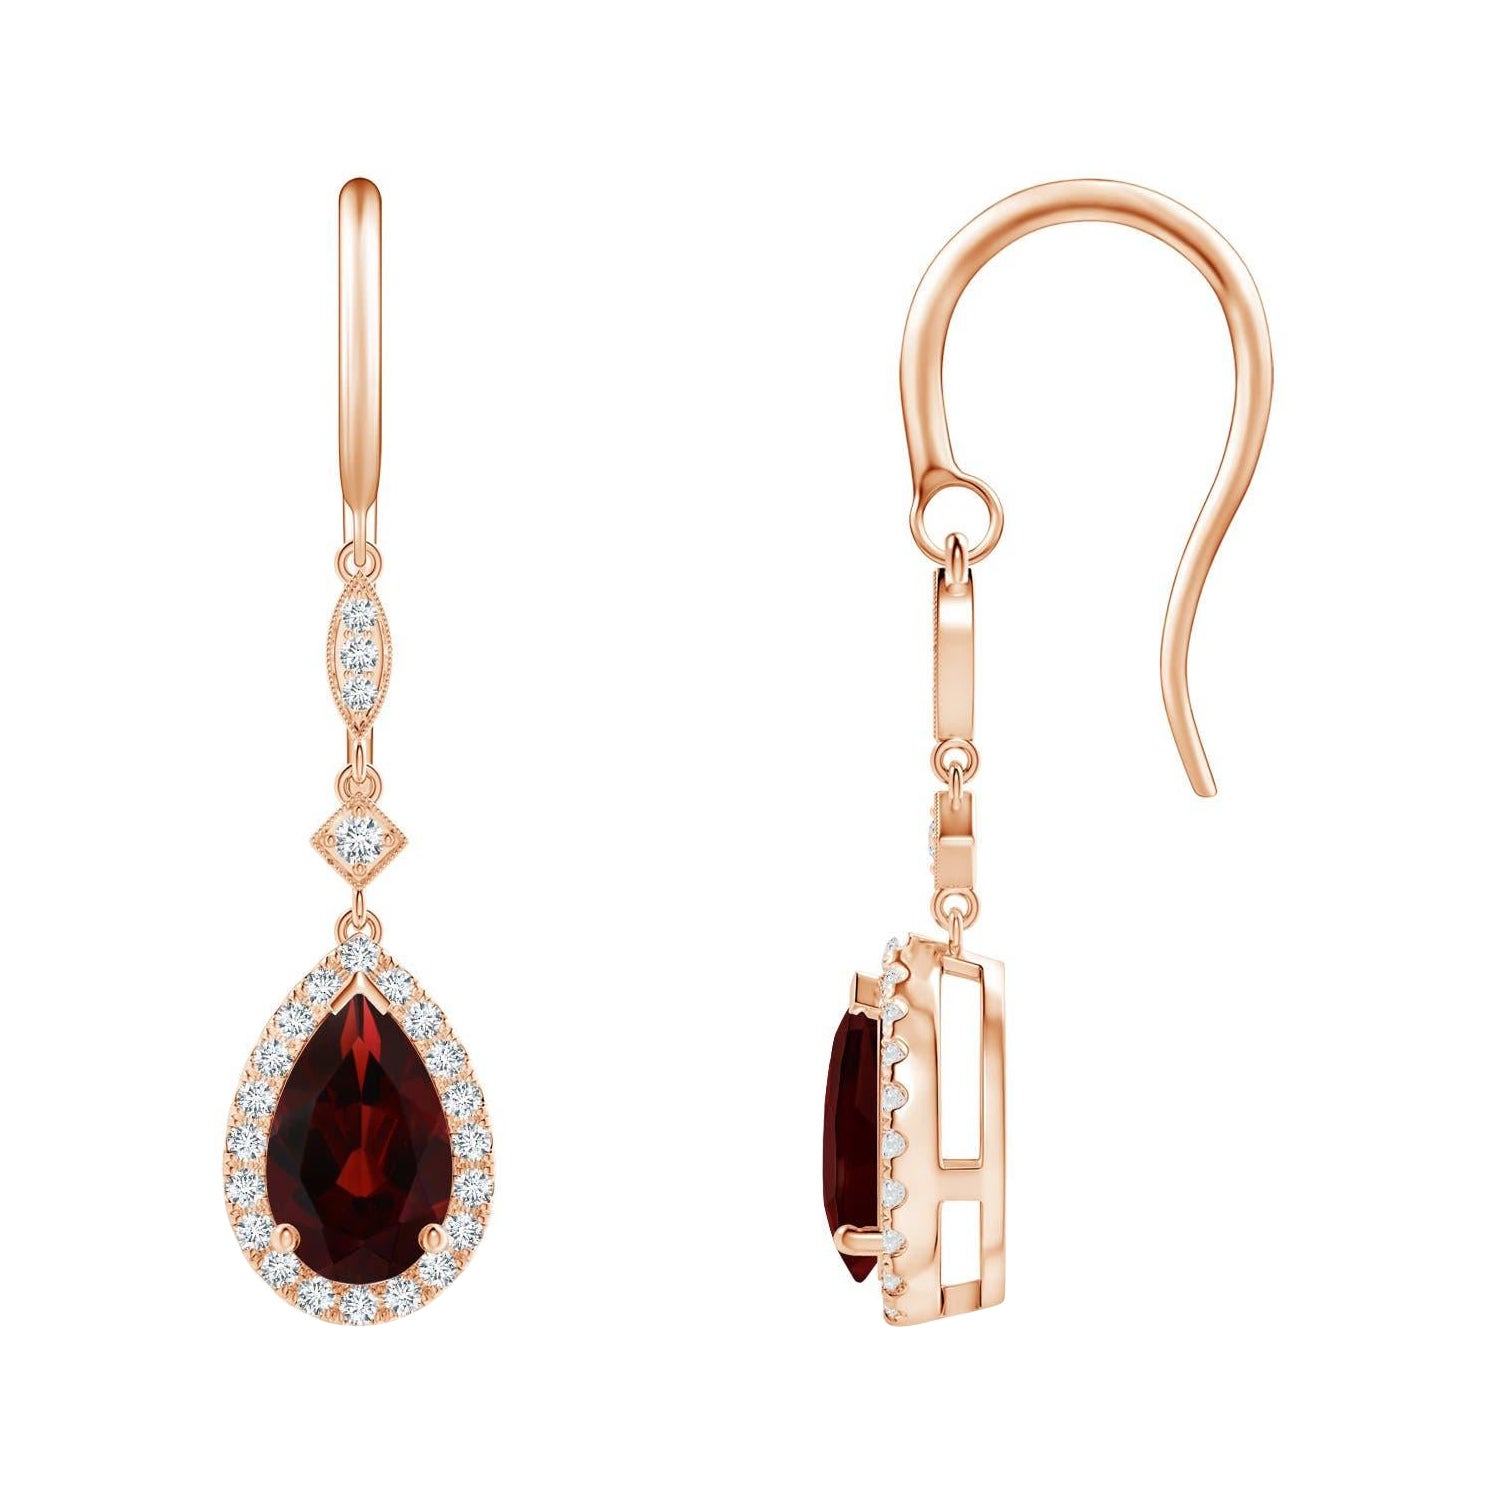 Natural Pear-Shaped 2.4ct Garnet Drop Earrings with Diamond in 14K Rose Gold For Sale